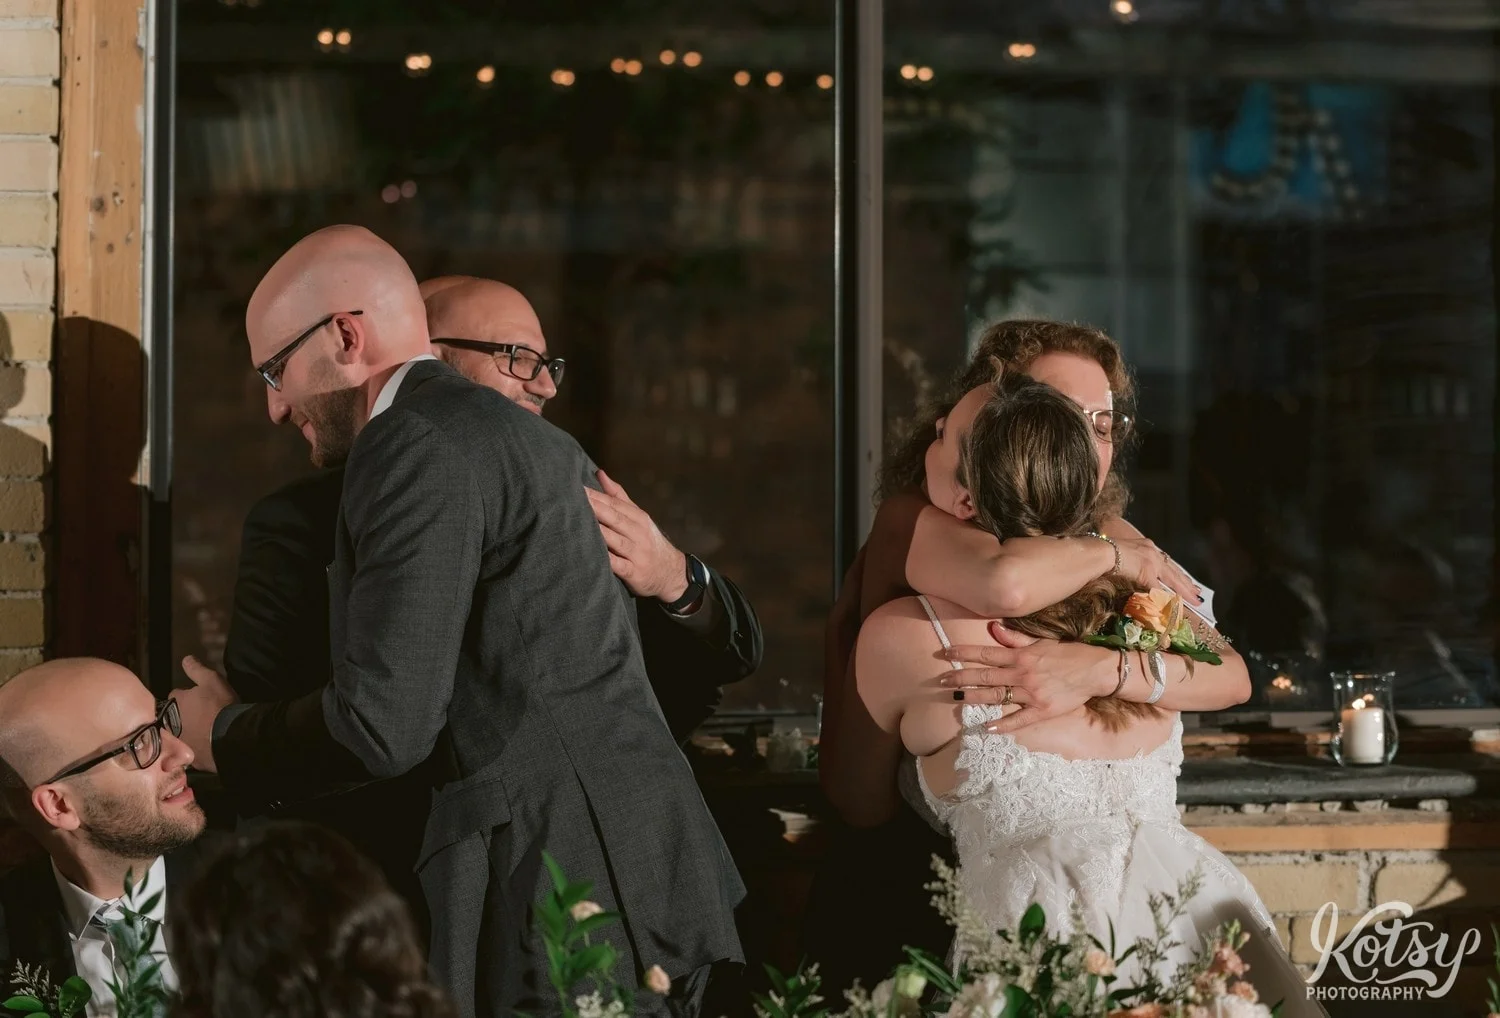 A bride and groom enjoy a hug from the groom's parents during Second Floor Events wedding reception in Toronto, Canada.